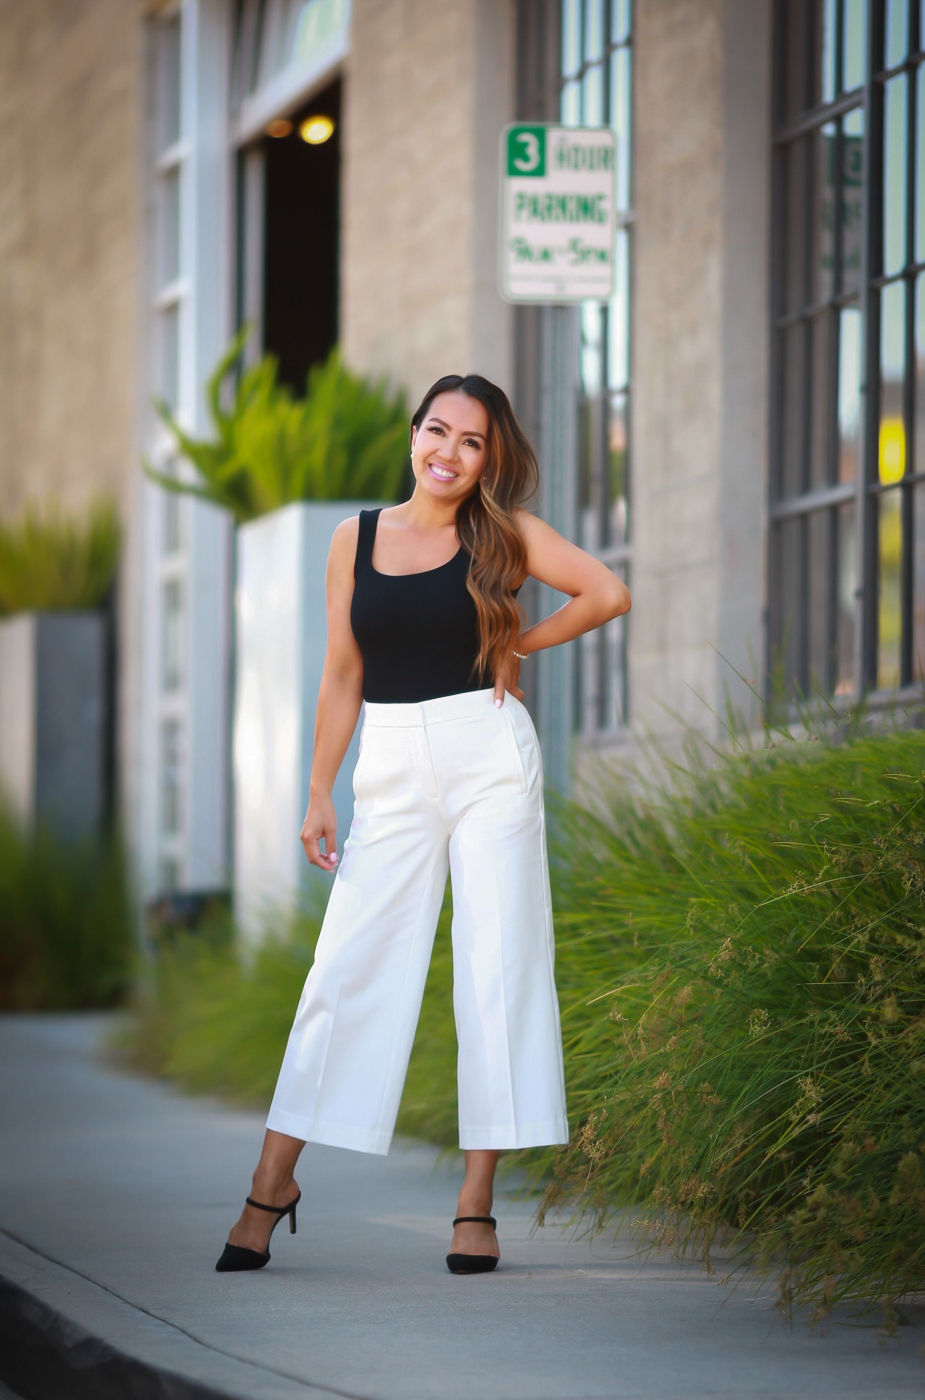 How To Wear Wide Leg Pants for Petites - Stylish Petite